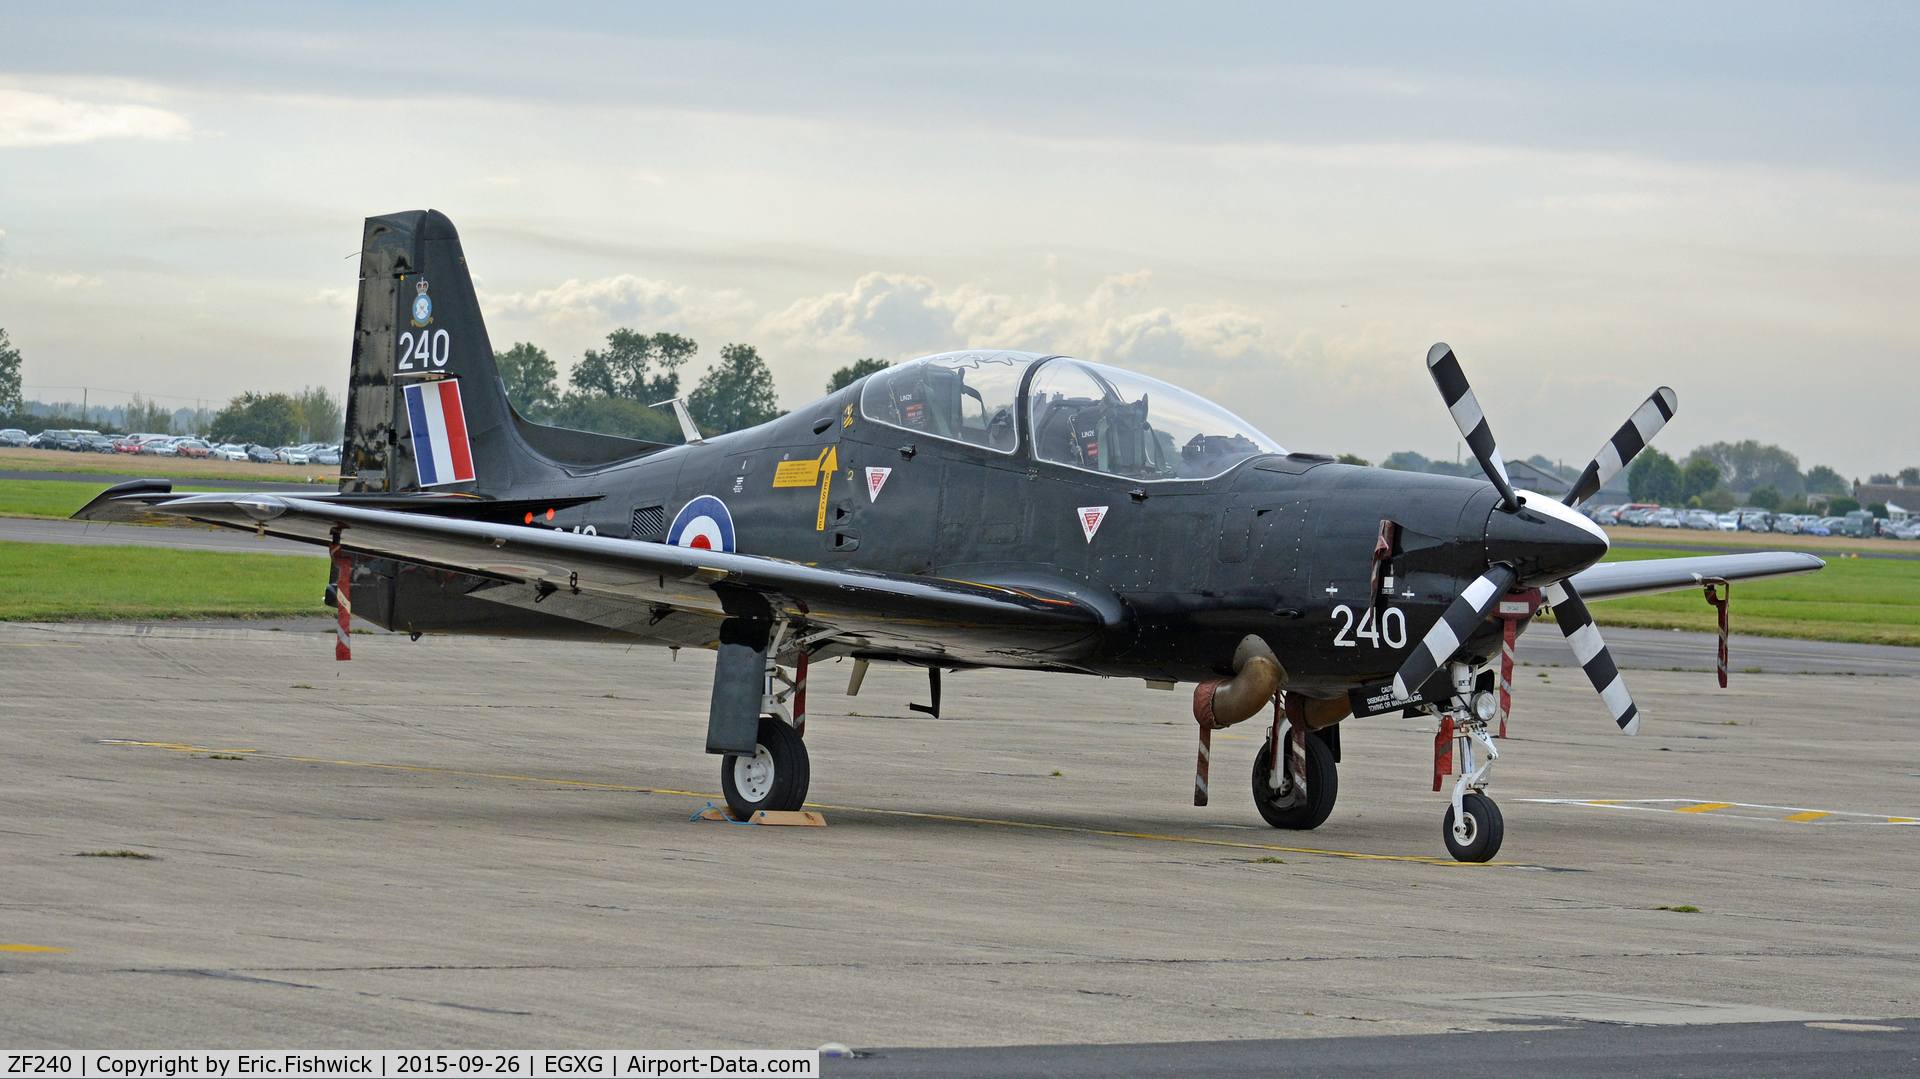 ZF240, 1990 Short S-312 Tucano T1 C/N S043/T40, 3. ZF240 at The Yorkshire Air Show, Church Fenton, Sept. 2015.